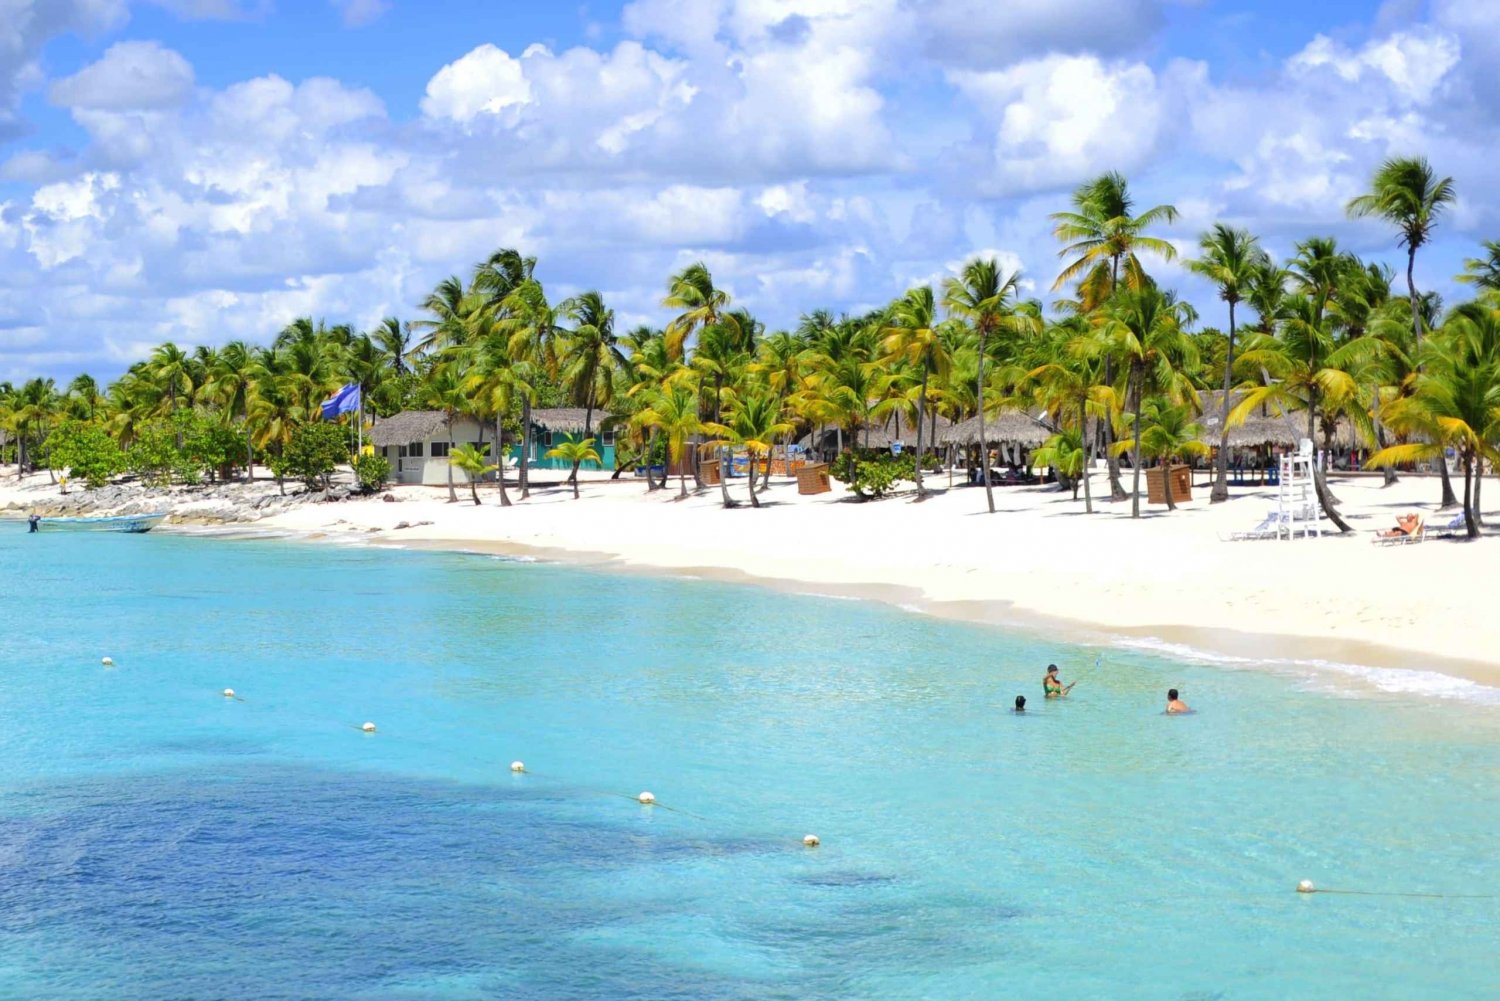 Saona Island Full-Day Tour with Lunch from Punta Cana